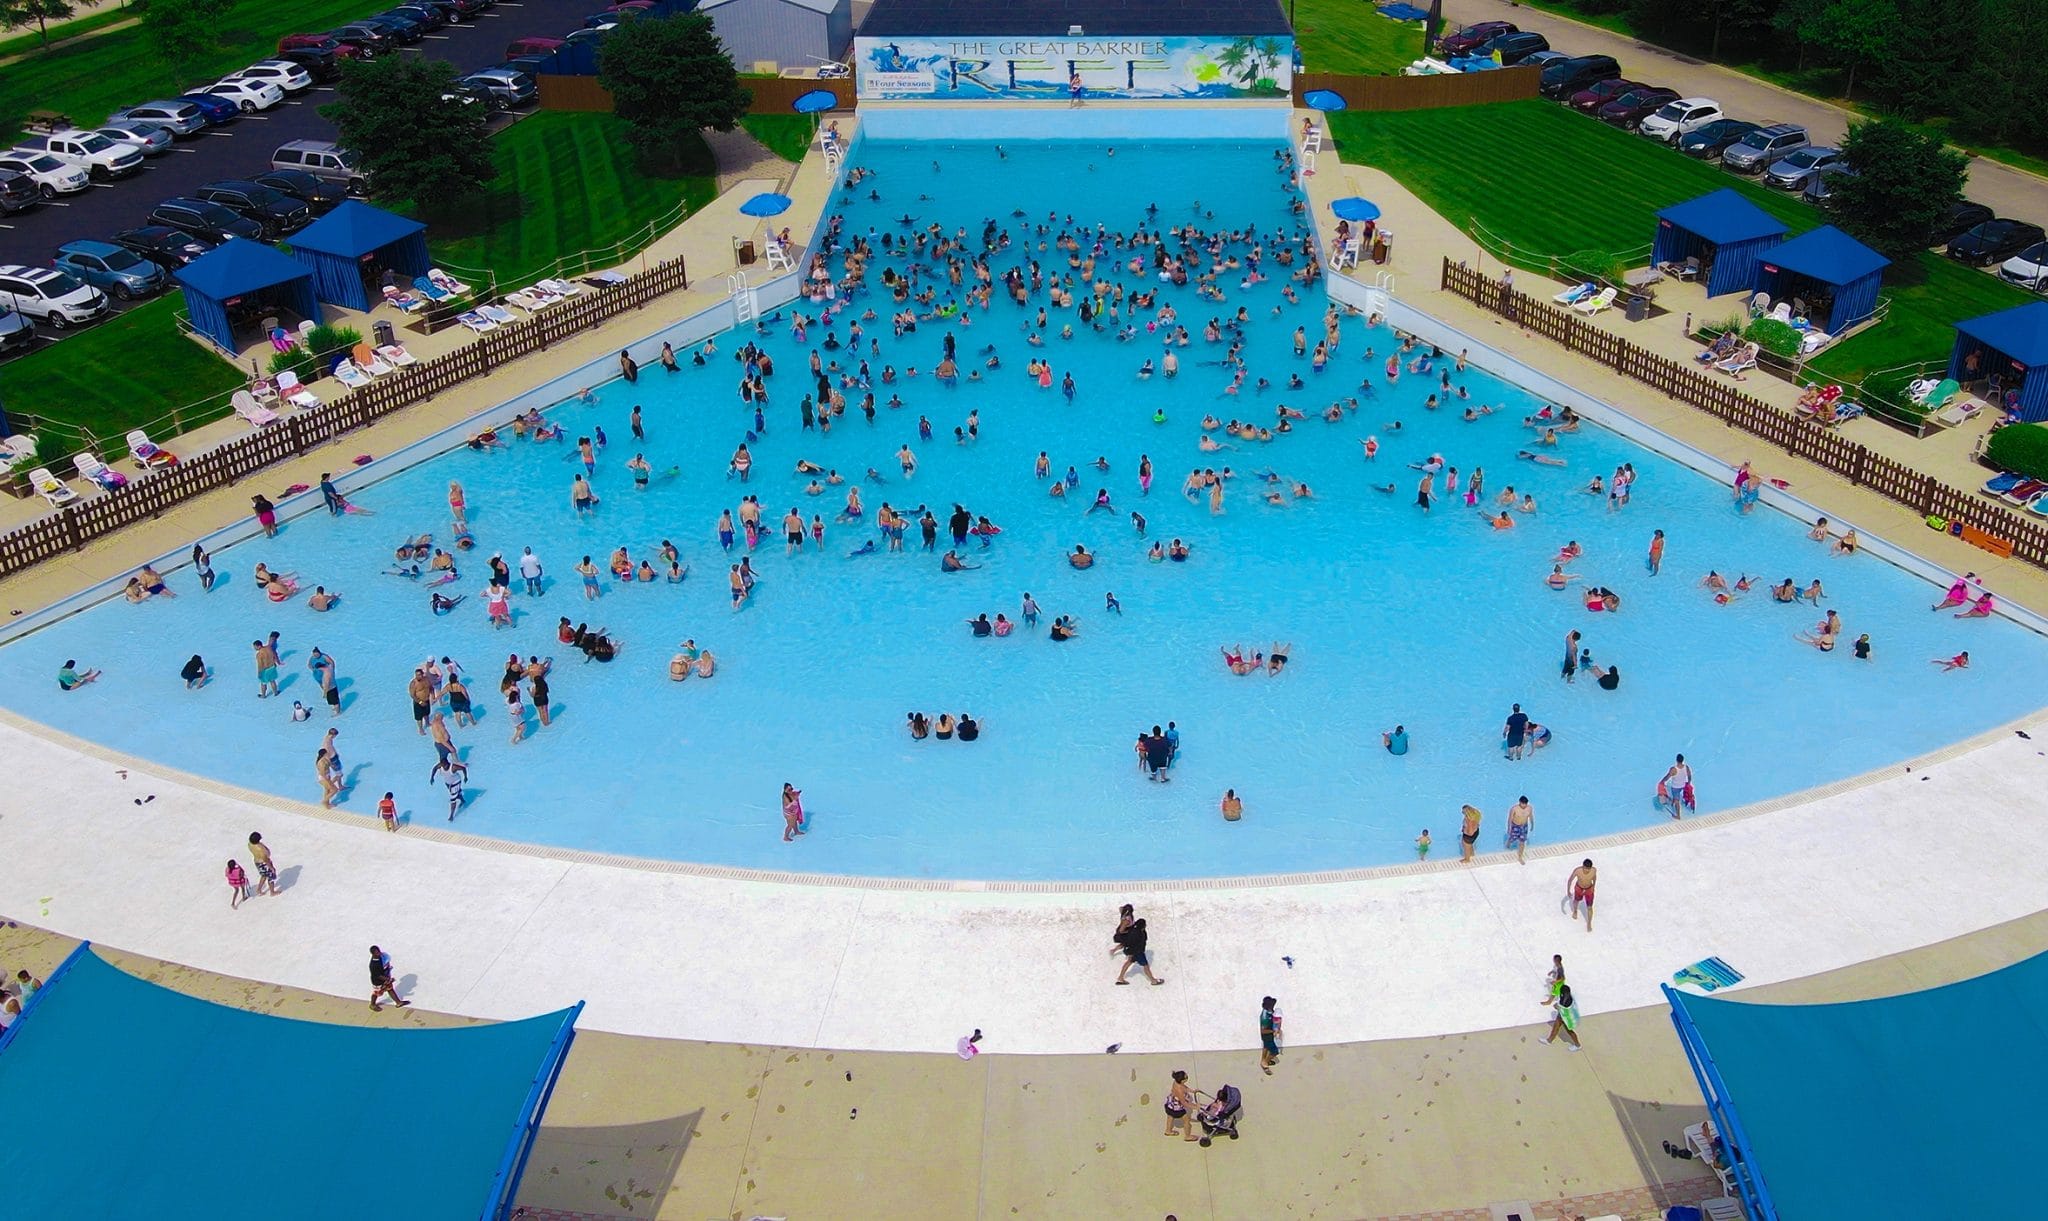 Image showing the wave pool at Raging Waves in Illinois